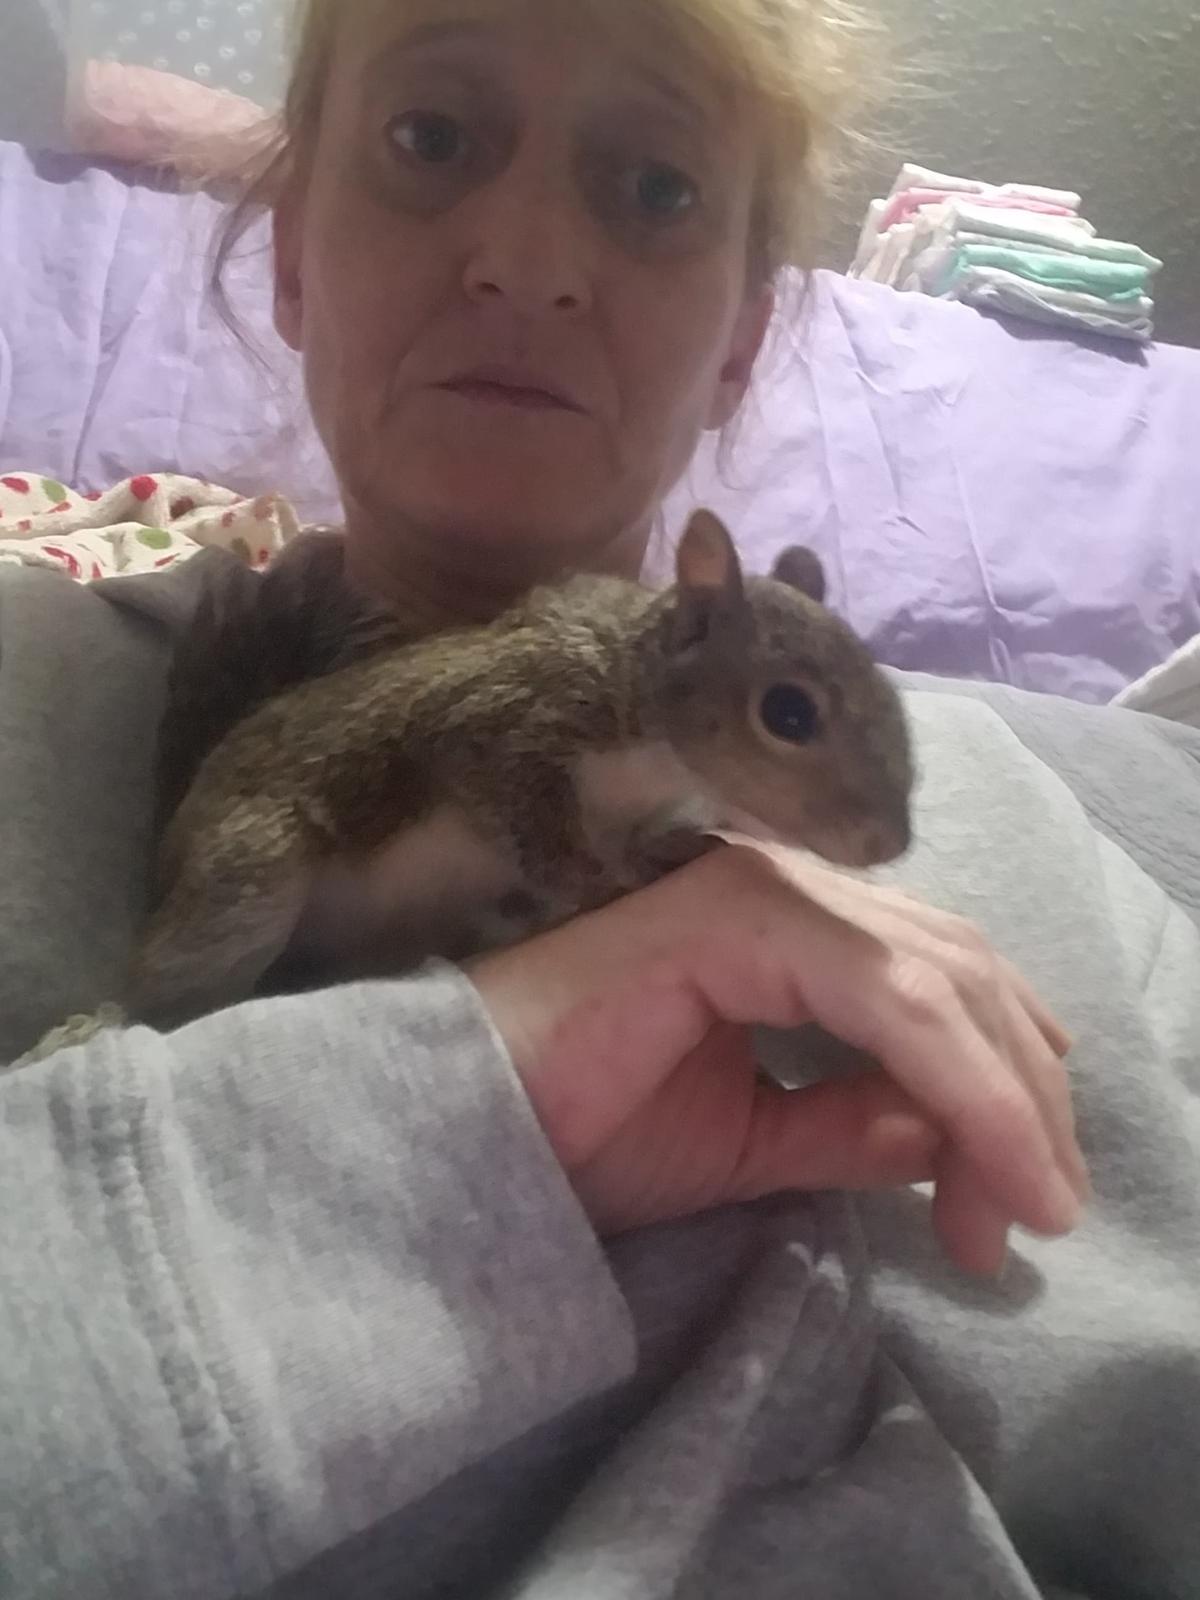 Laura Ross and the lucky squirrel. (Courtesy of <a href="https://www.facebook.com/Unikorngrrl/">Laura Ross</a>)